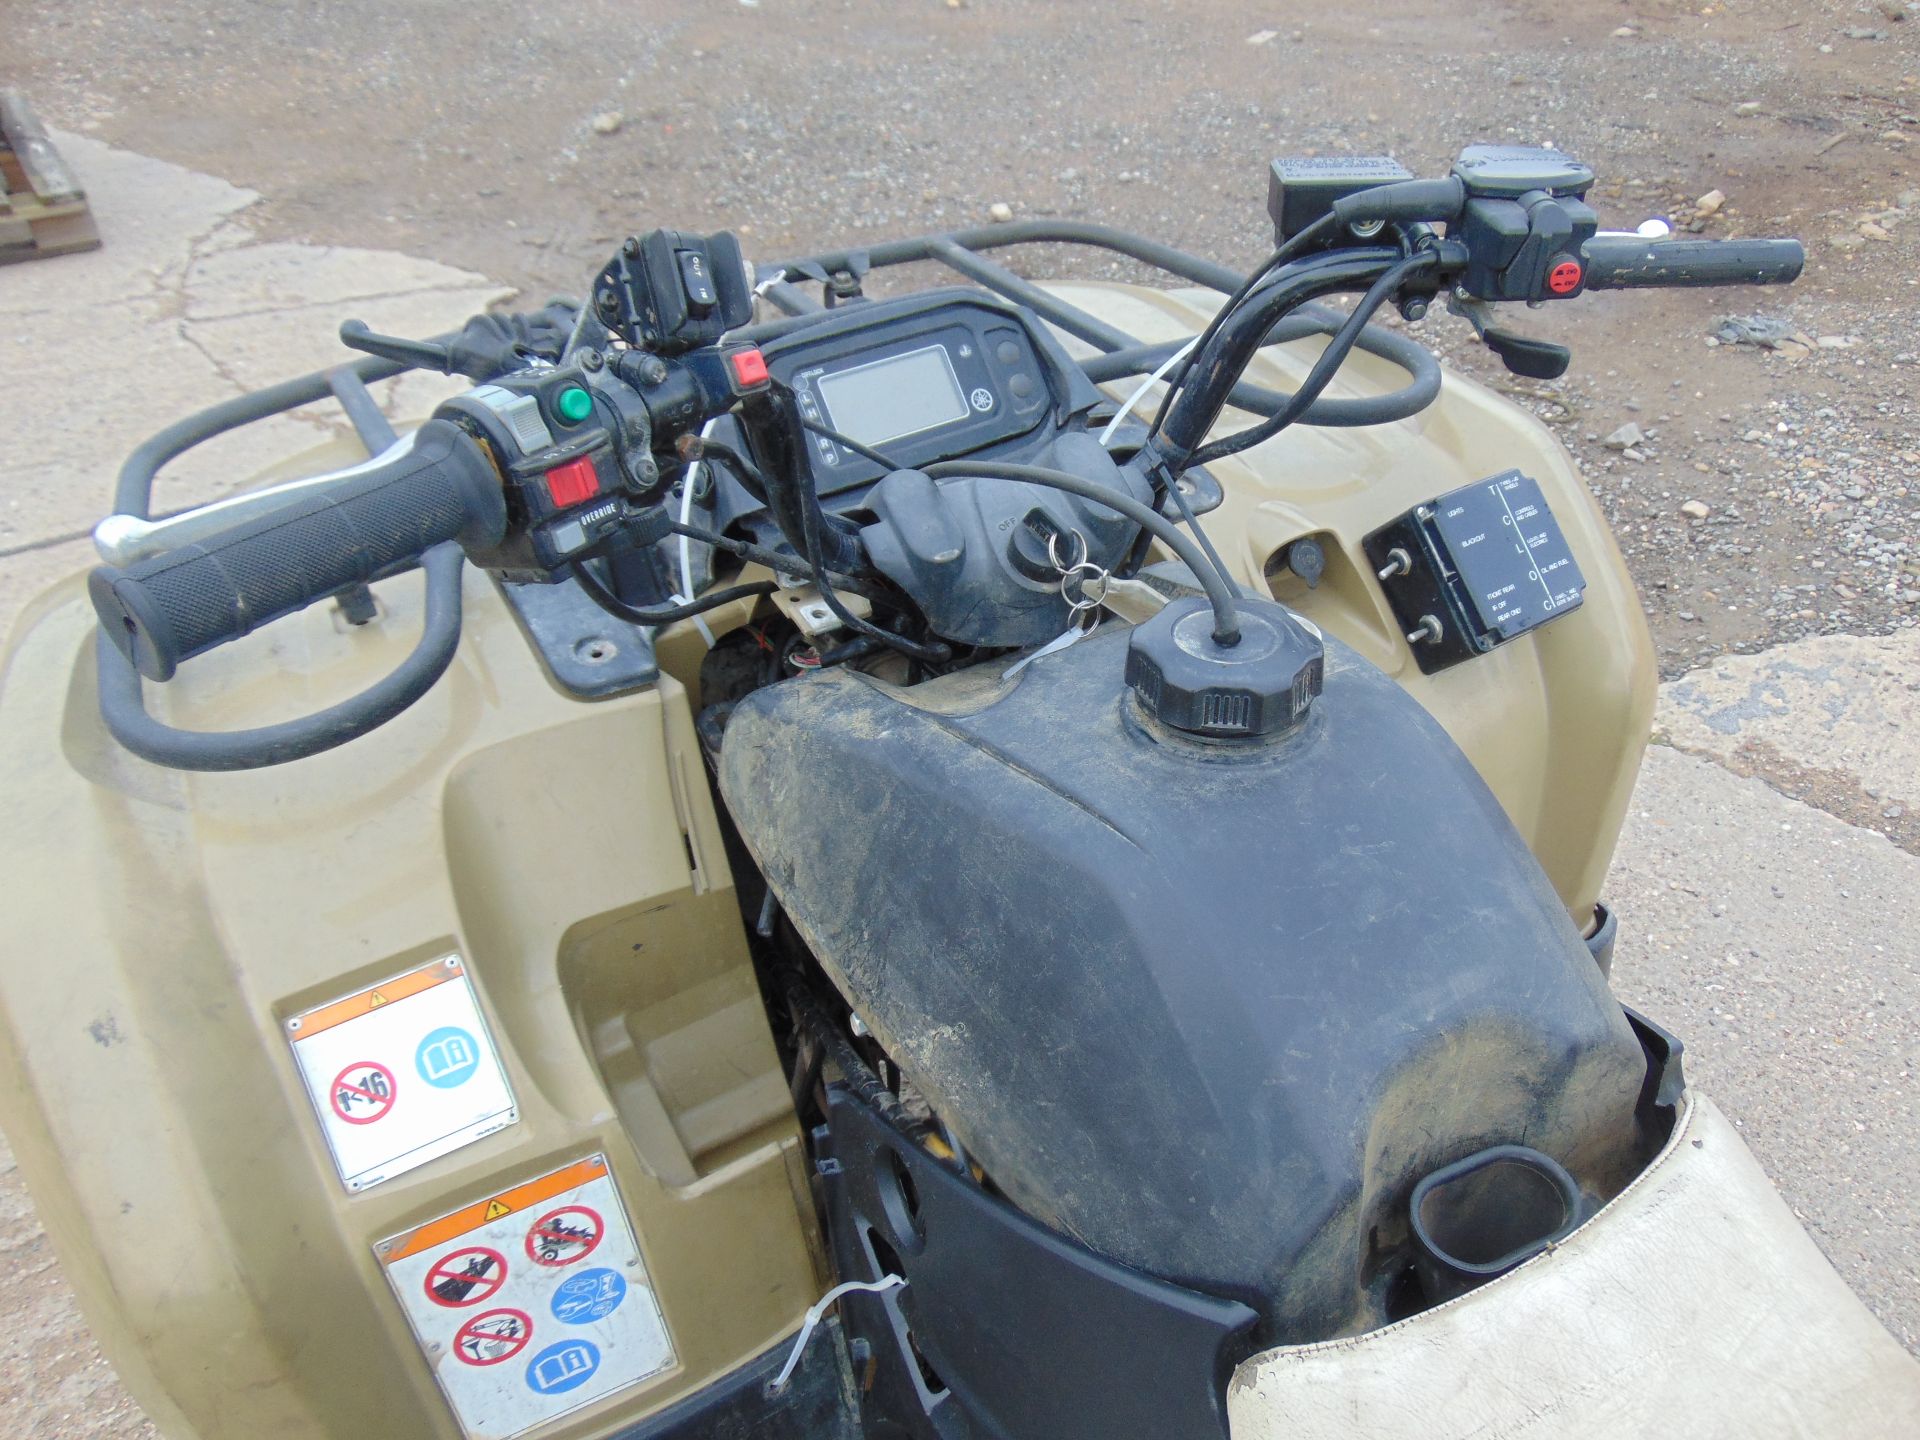 Military Specification Yamaha Grizzly 450 4 x 4 ATV Quad Bike - Image 10 of 16